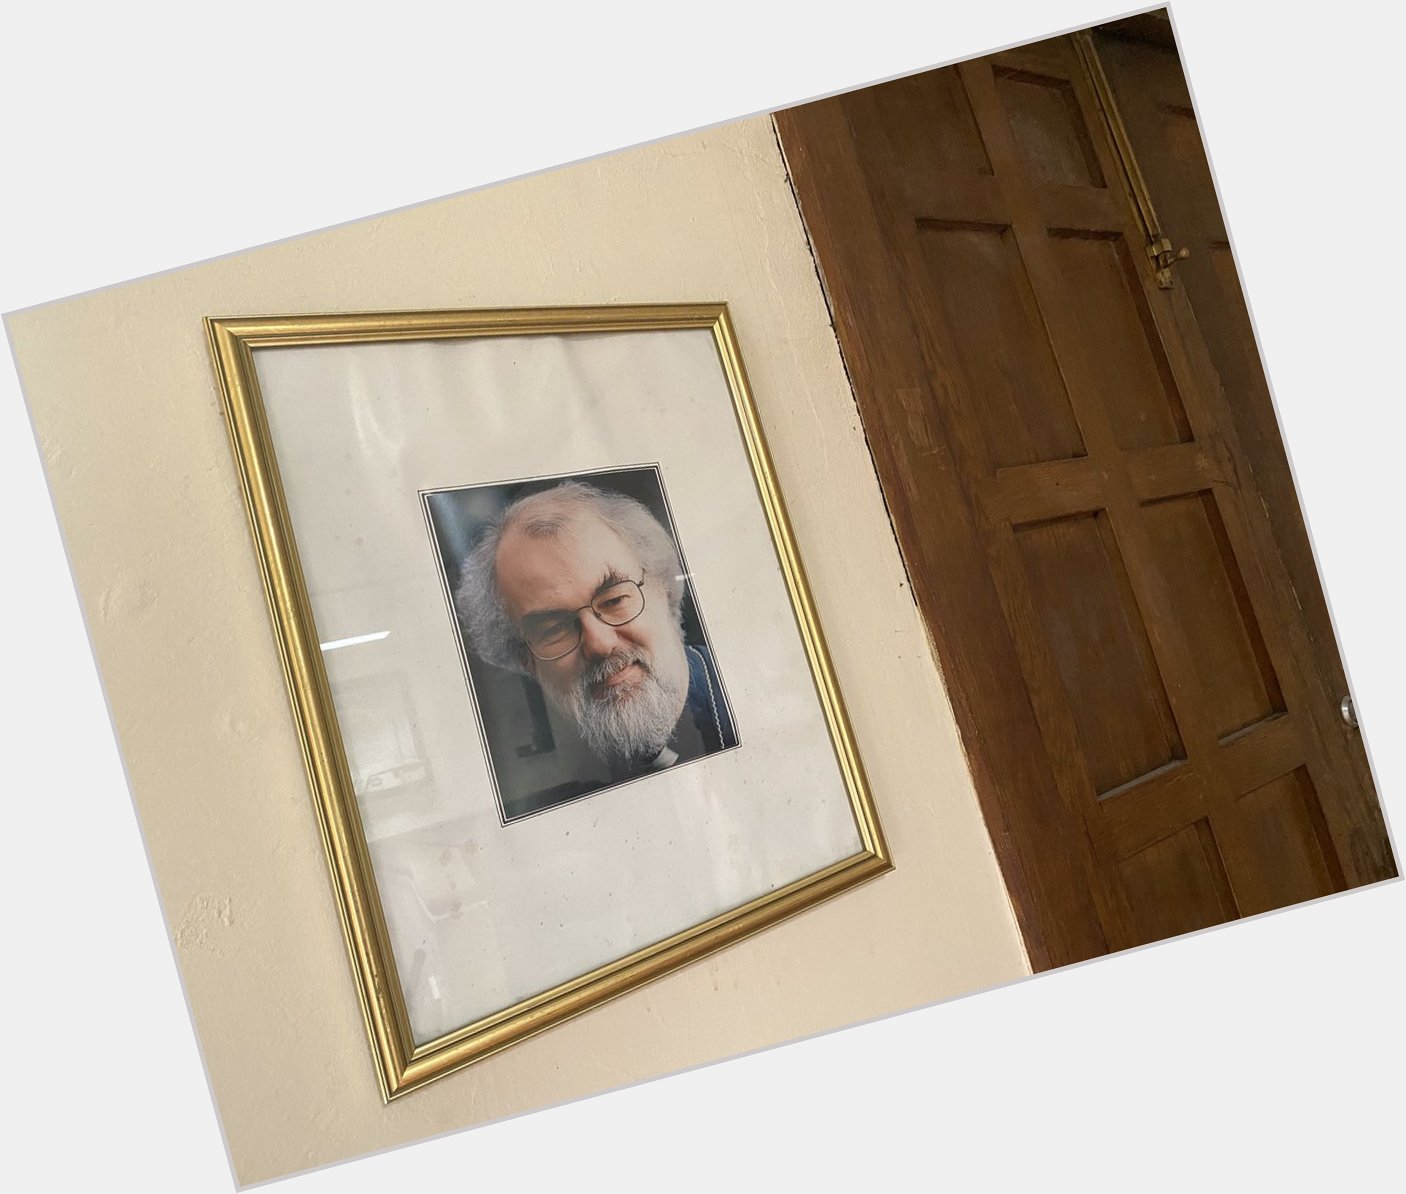 Happy birthday to former bishop of Monmouth, Rowan Williams. Photo in an entrance area 